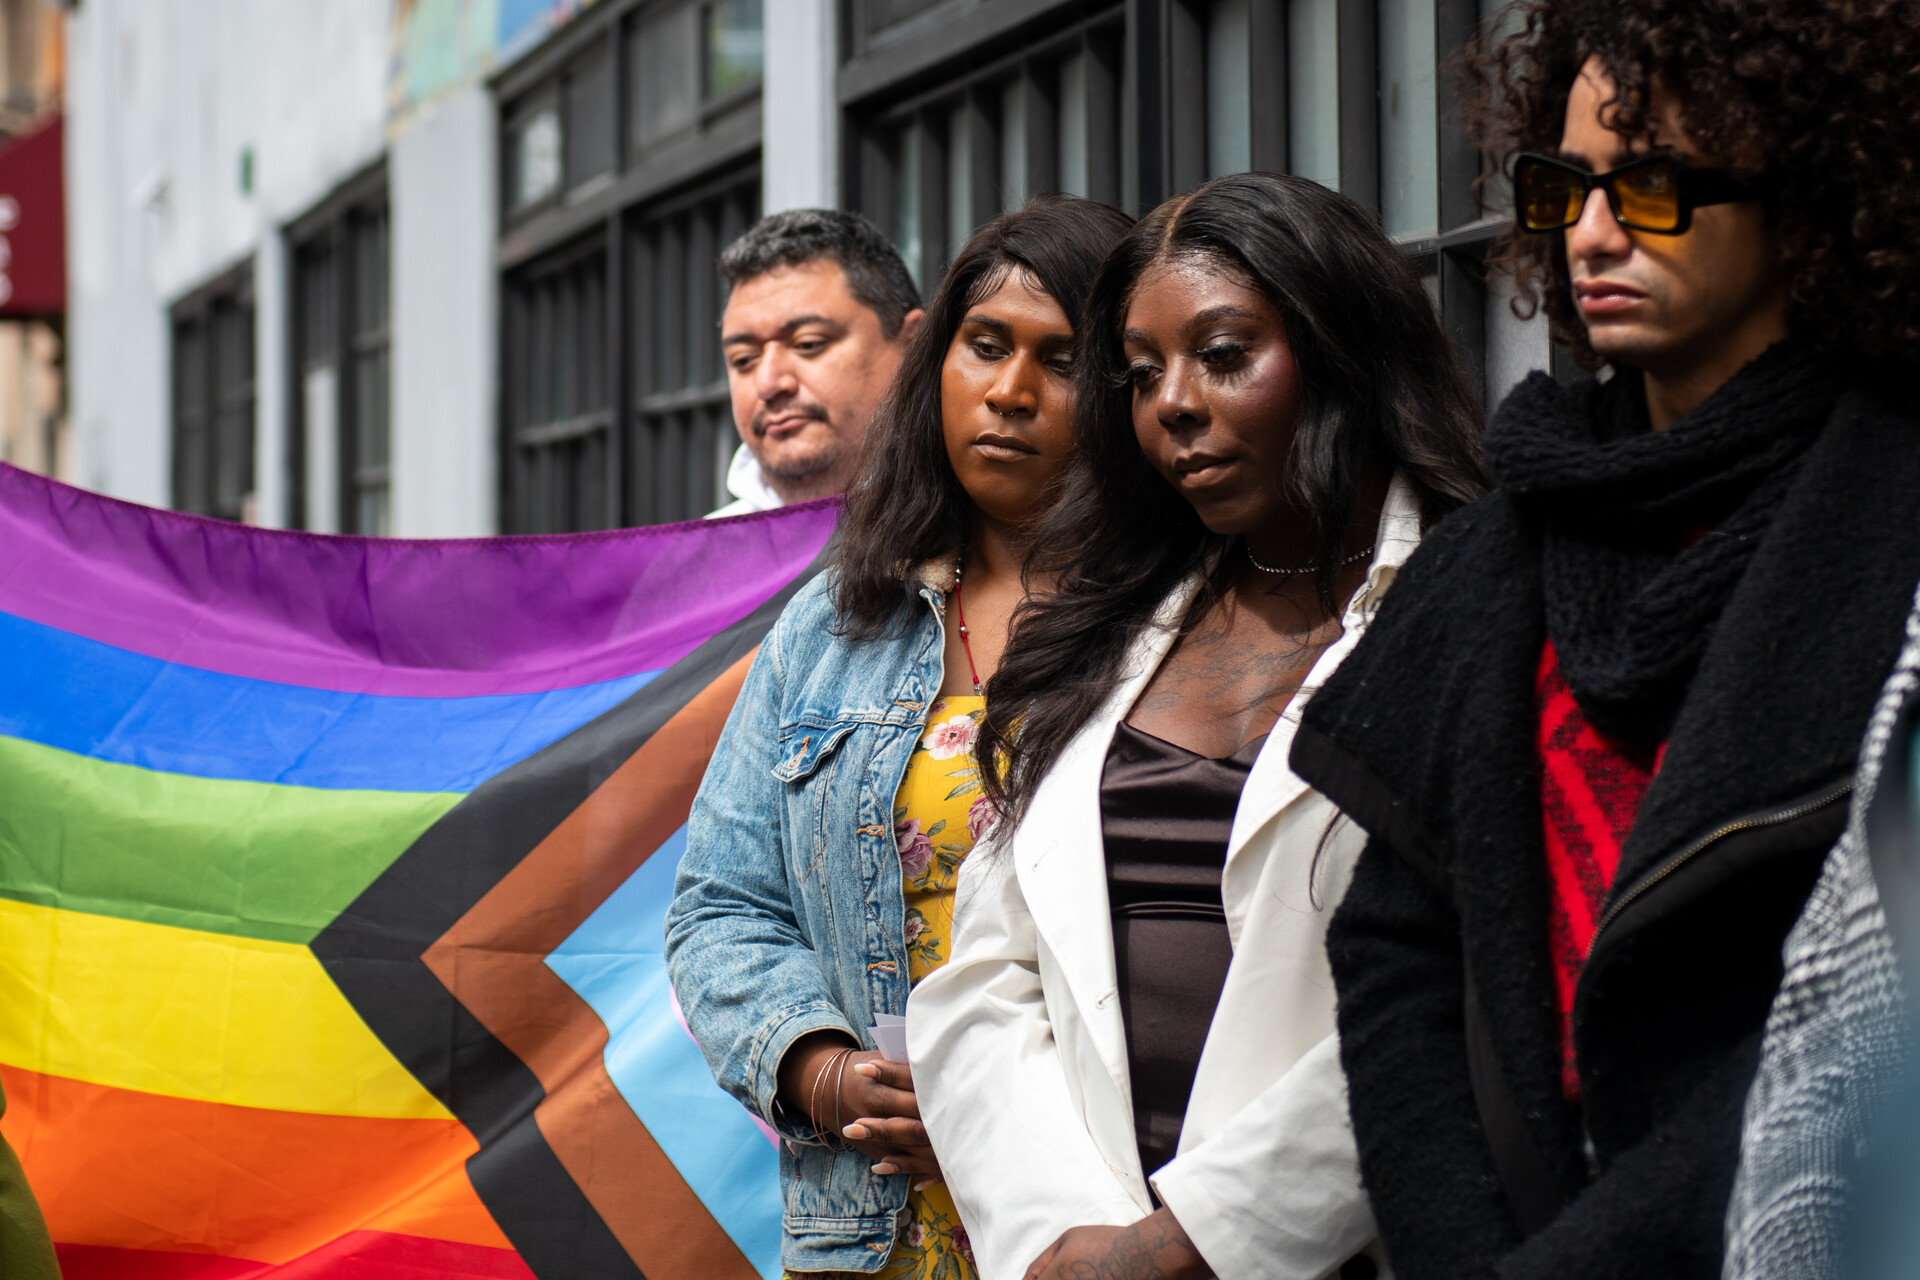 Black and brown people stand listening with stern faces as a pride flag is held in the background